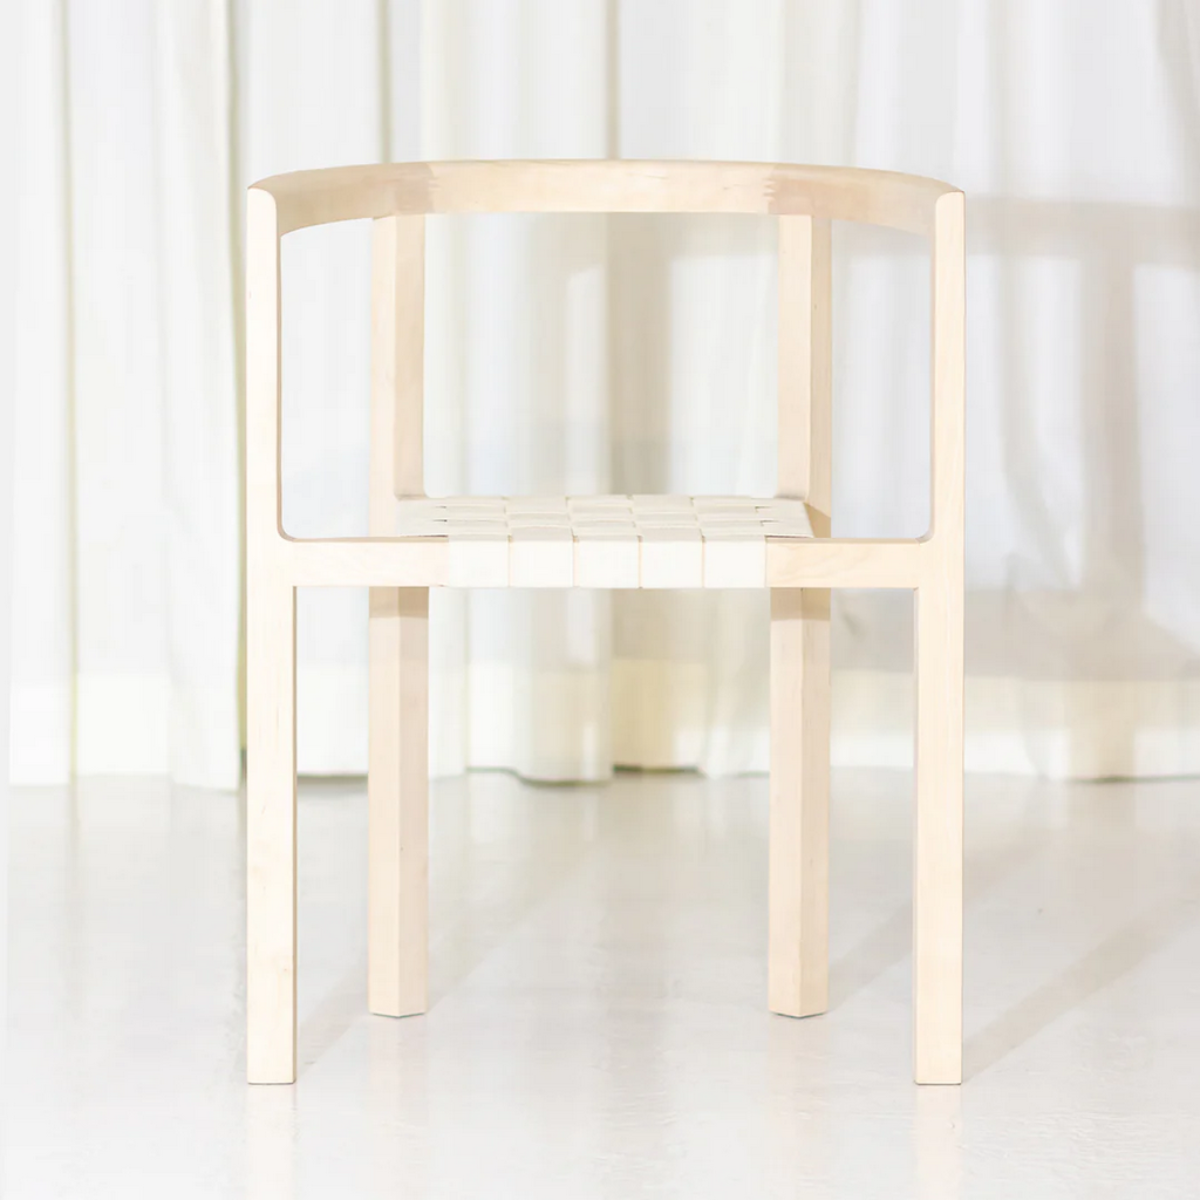 Enghave Chair // Exhibition Model